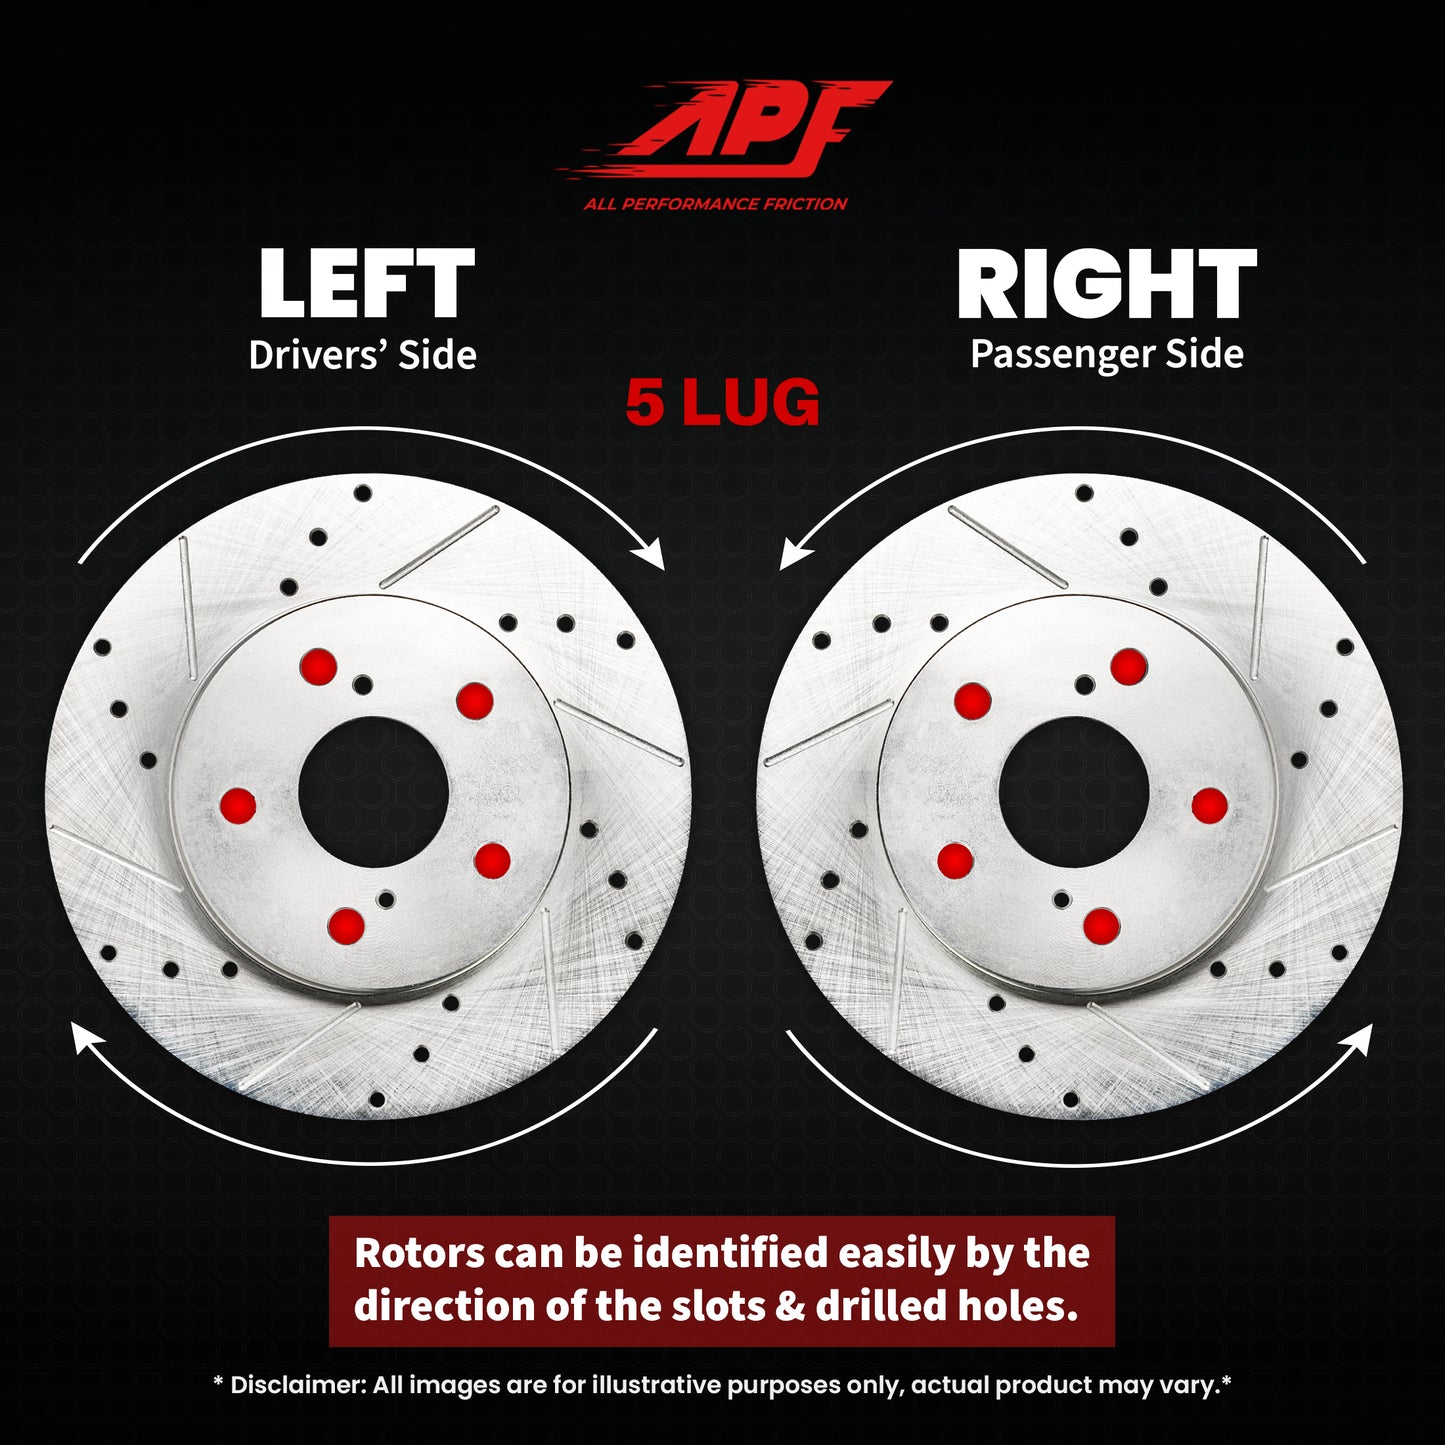 APF All Performance Friction Front Rotors compatible with Lexus RX400h 2006-2008 Zinc Drilled Slotted Rotors | $150.91